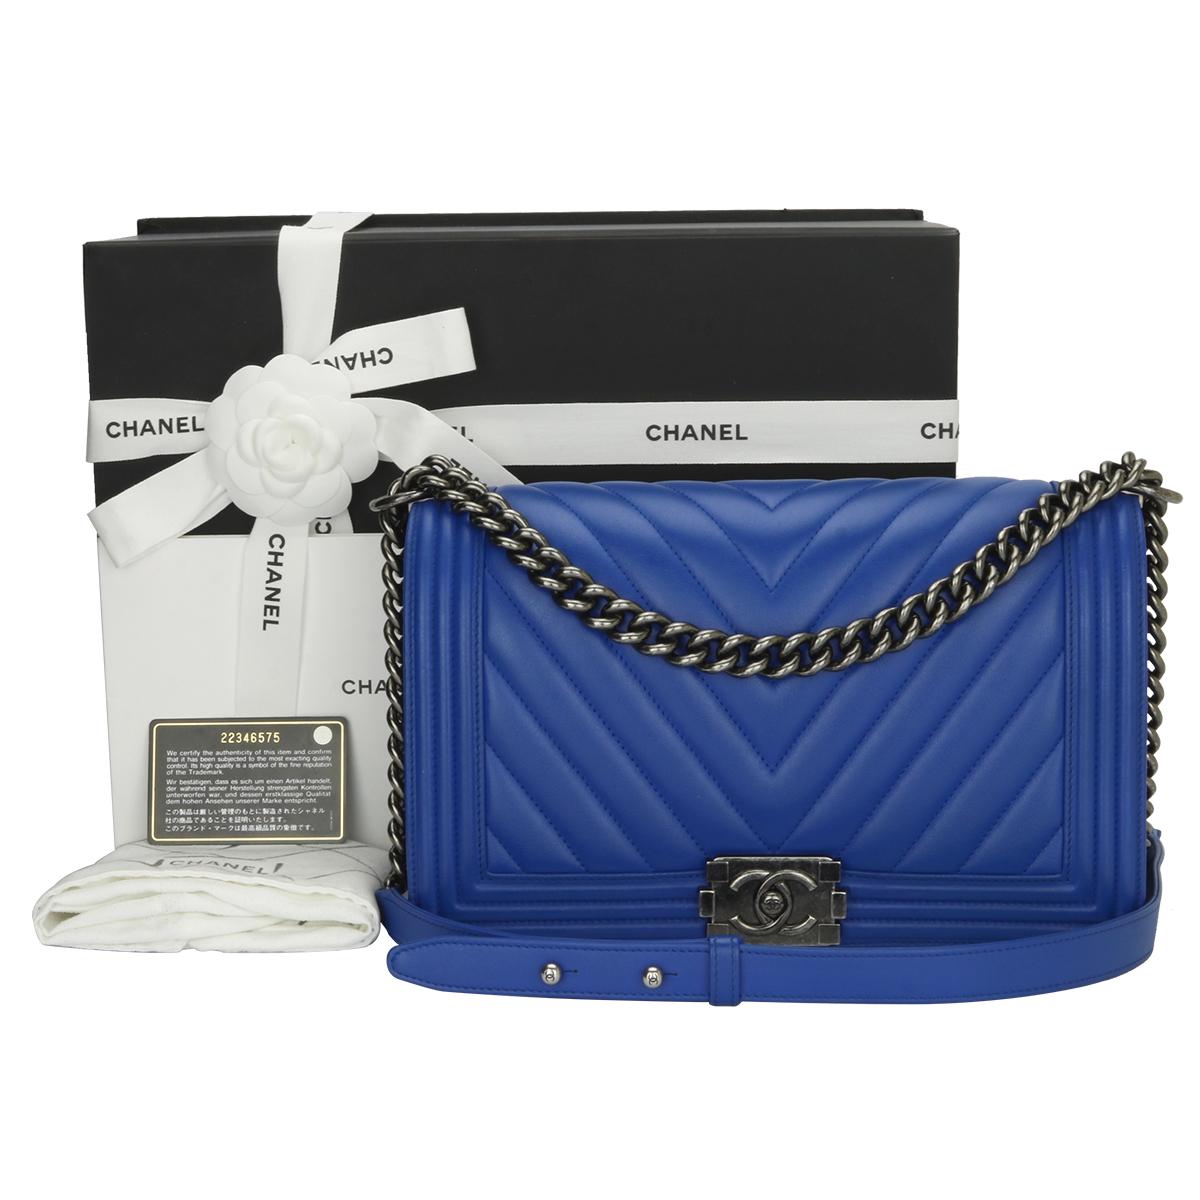 Authentic CHANEL New Medium Chevron Boy Blue Calfskin with Ruthenium Hardware 2016.

This stunning bag is still in a mint condition; it still keeps its original shape and the hardware still very shiny.

Exterior Condition: Mint condition, corners